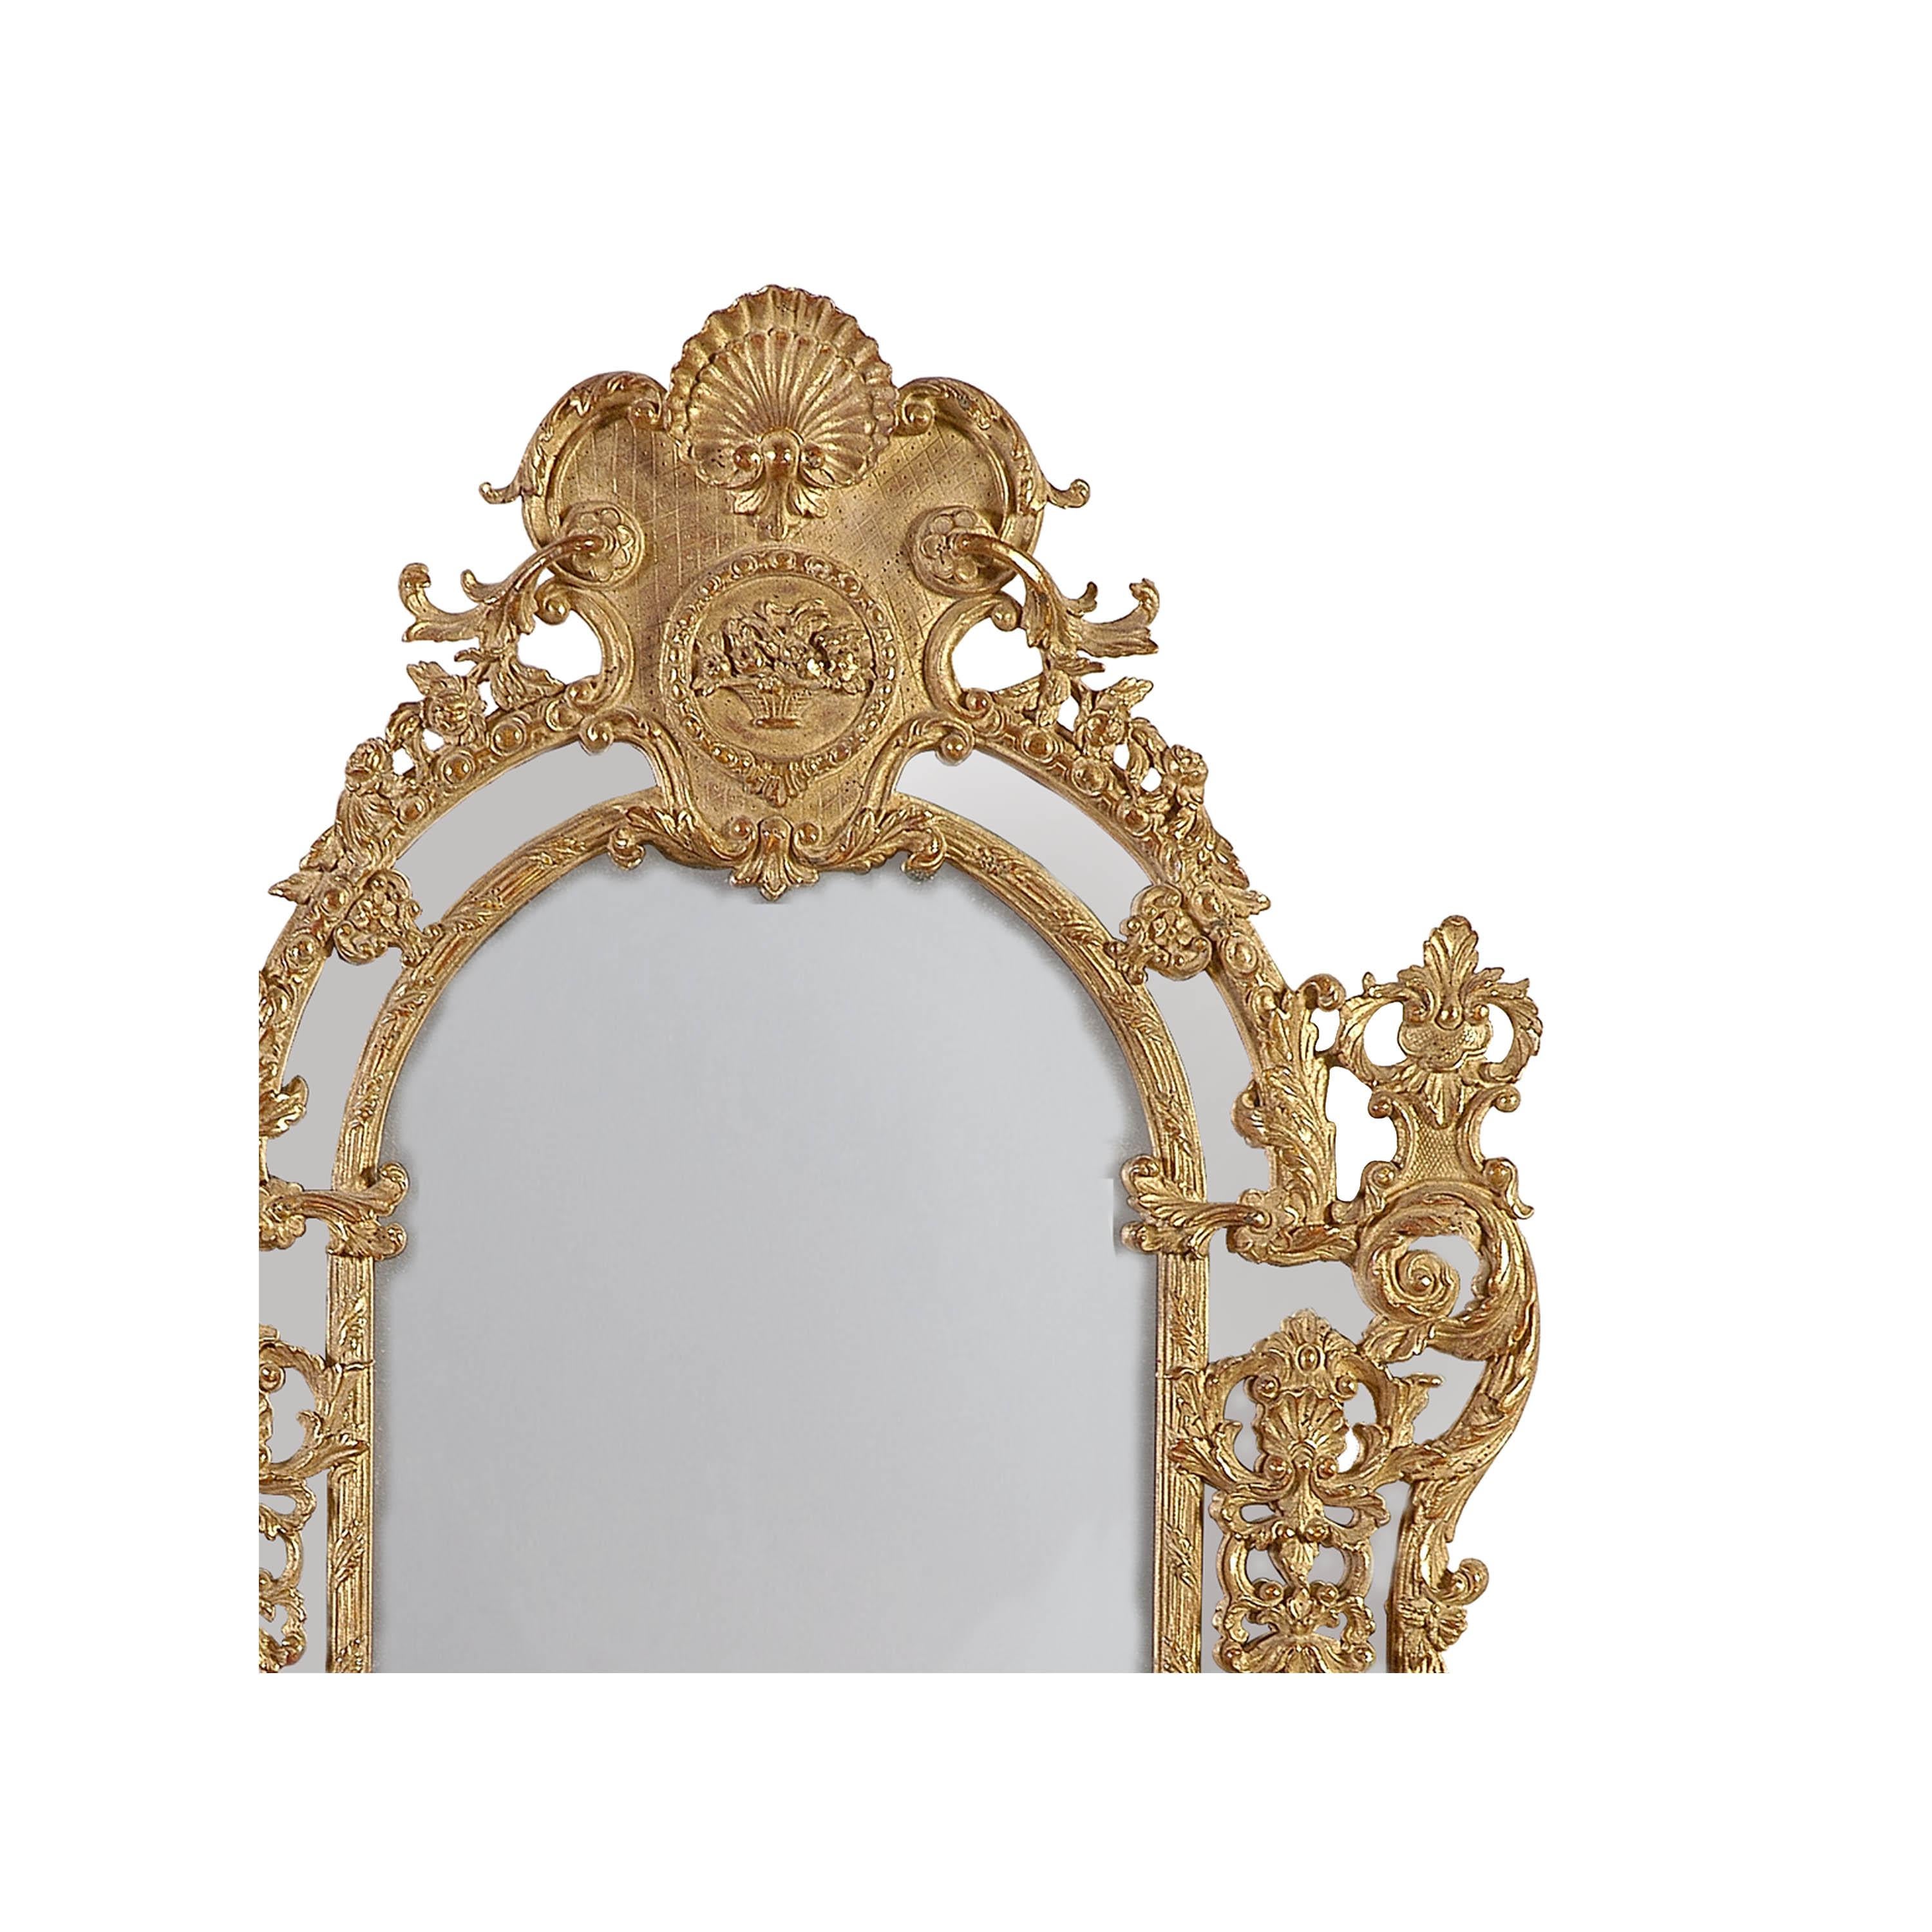 Neoclassical Regency style handcrafted mirror. Rectangular hand carved wooden structure with gold foil finished, Spain, 1970.